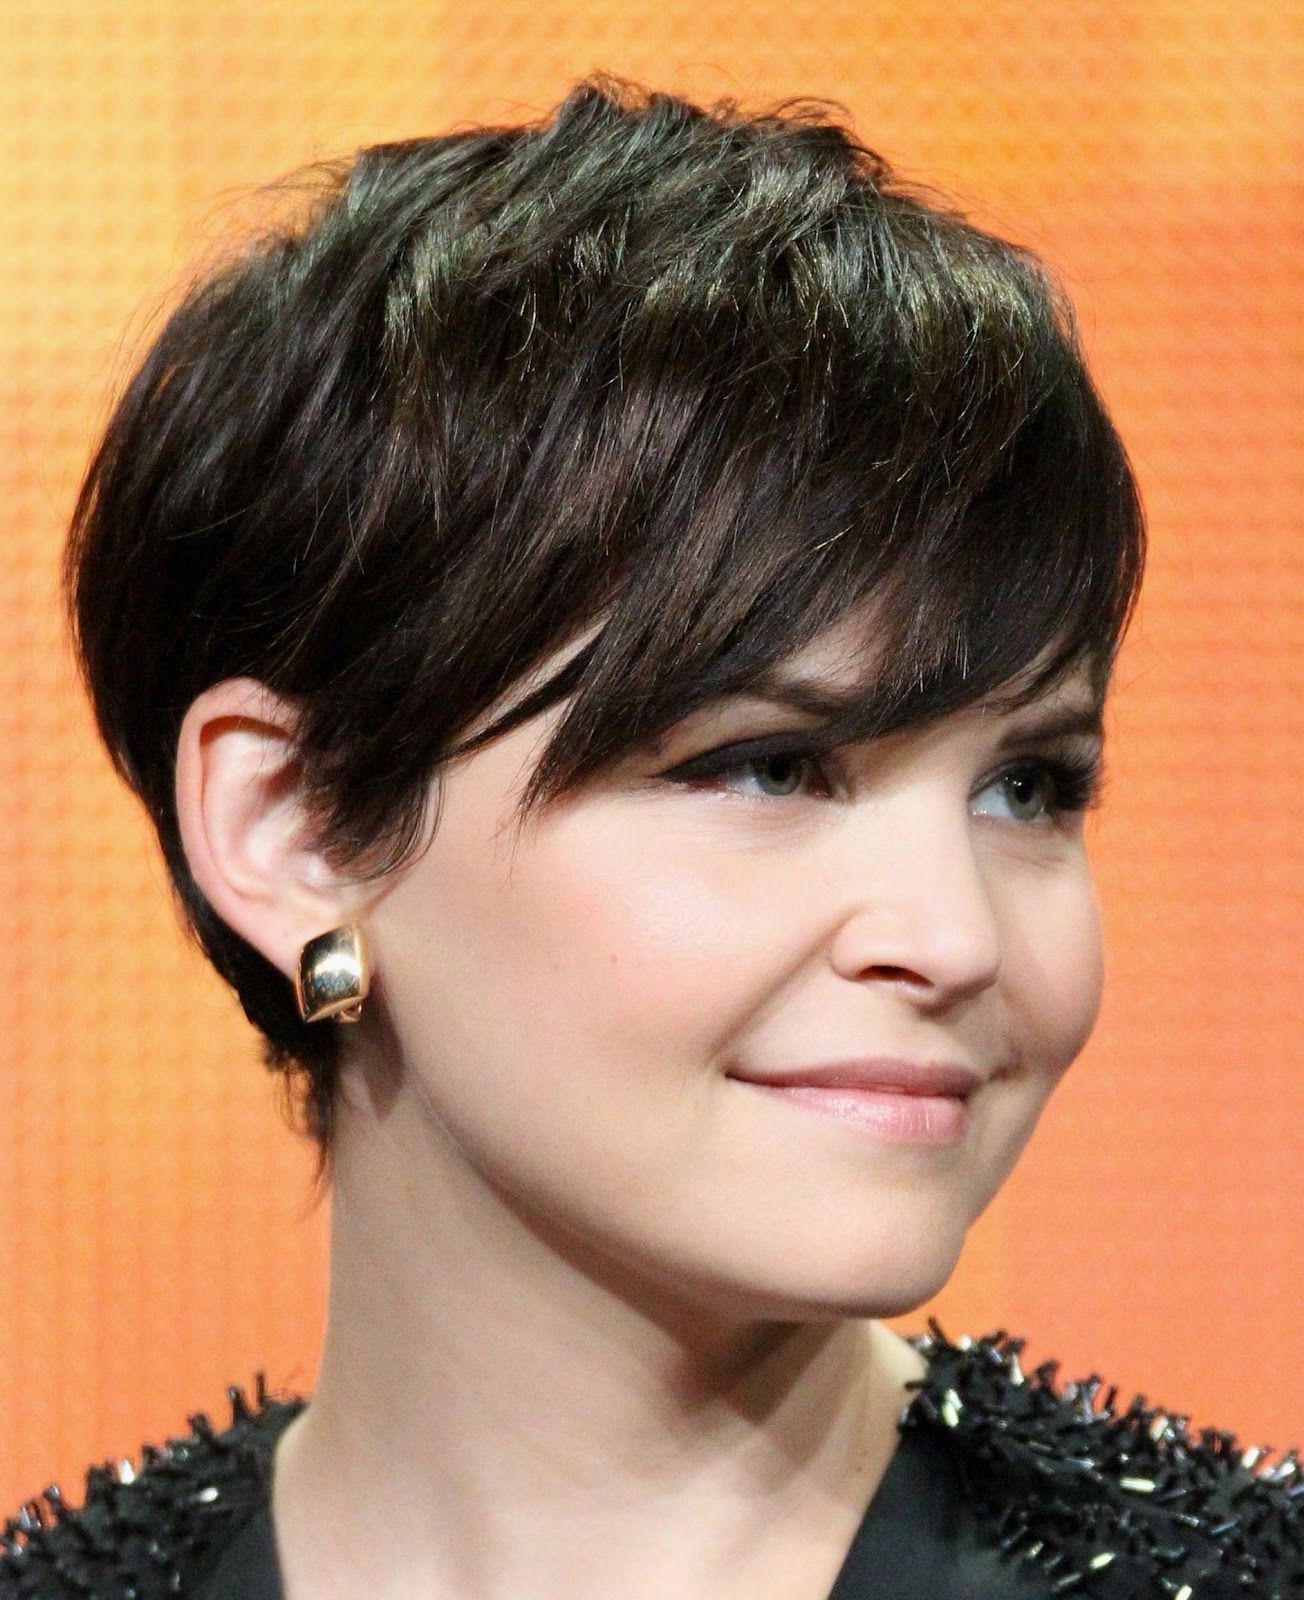 20 Stunning Looks With Pixie Cut For Round Face In 2018 | Haircuts Pertaining To Short Hairstyles With Bangs For Round Face (View 7 of 25)